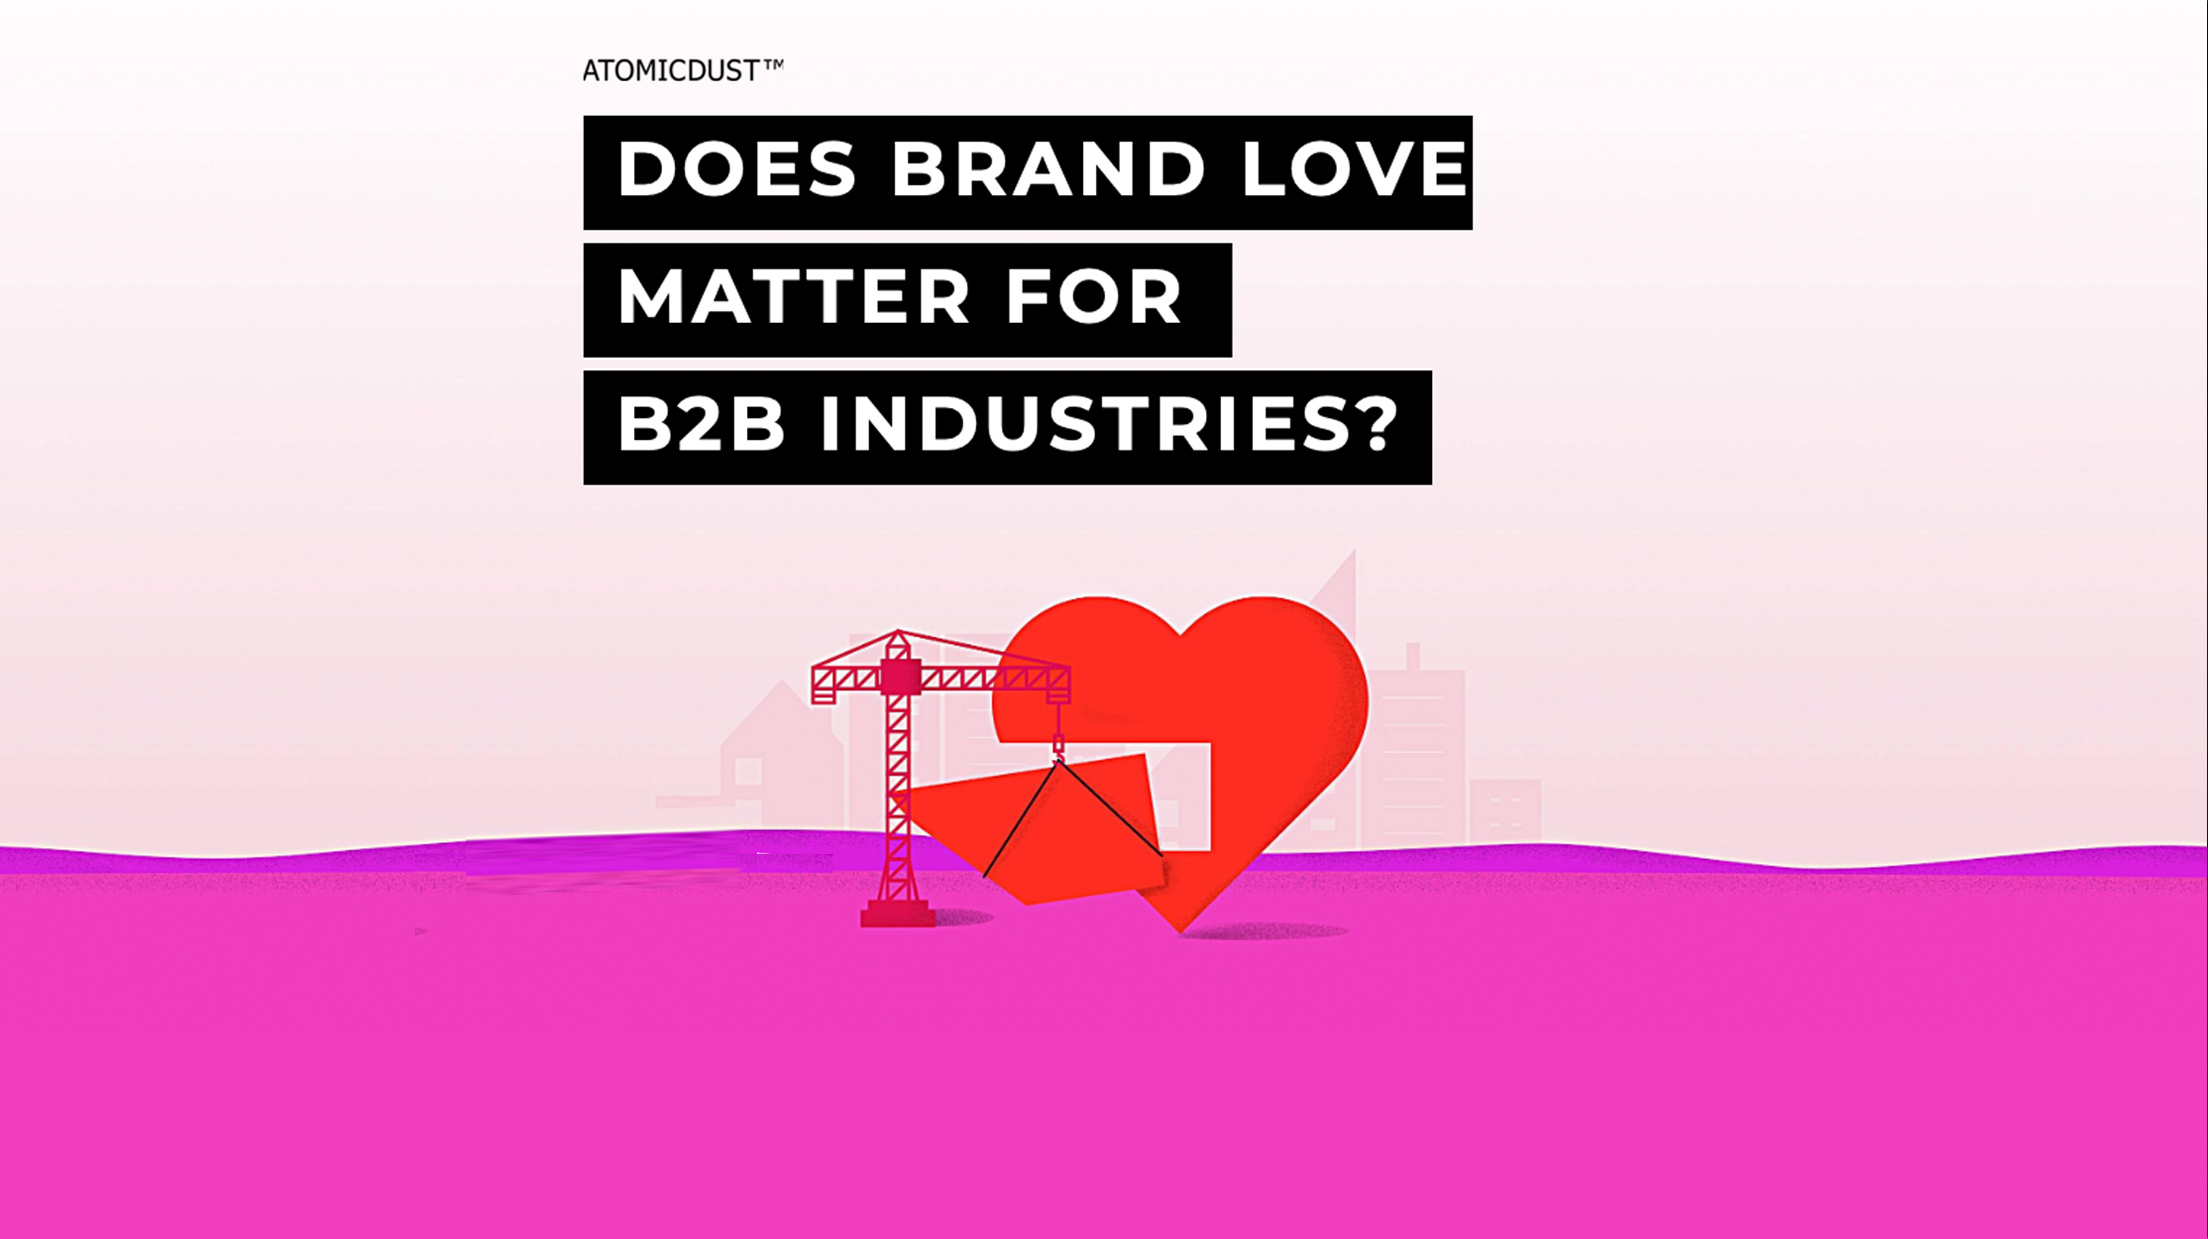 Does brand love matter for B2B Industries